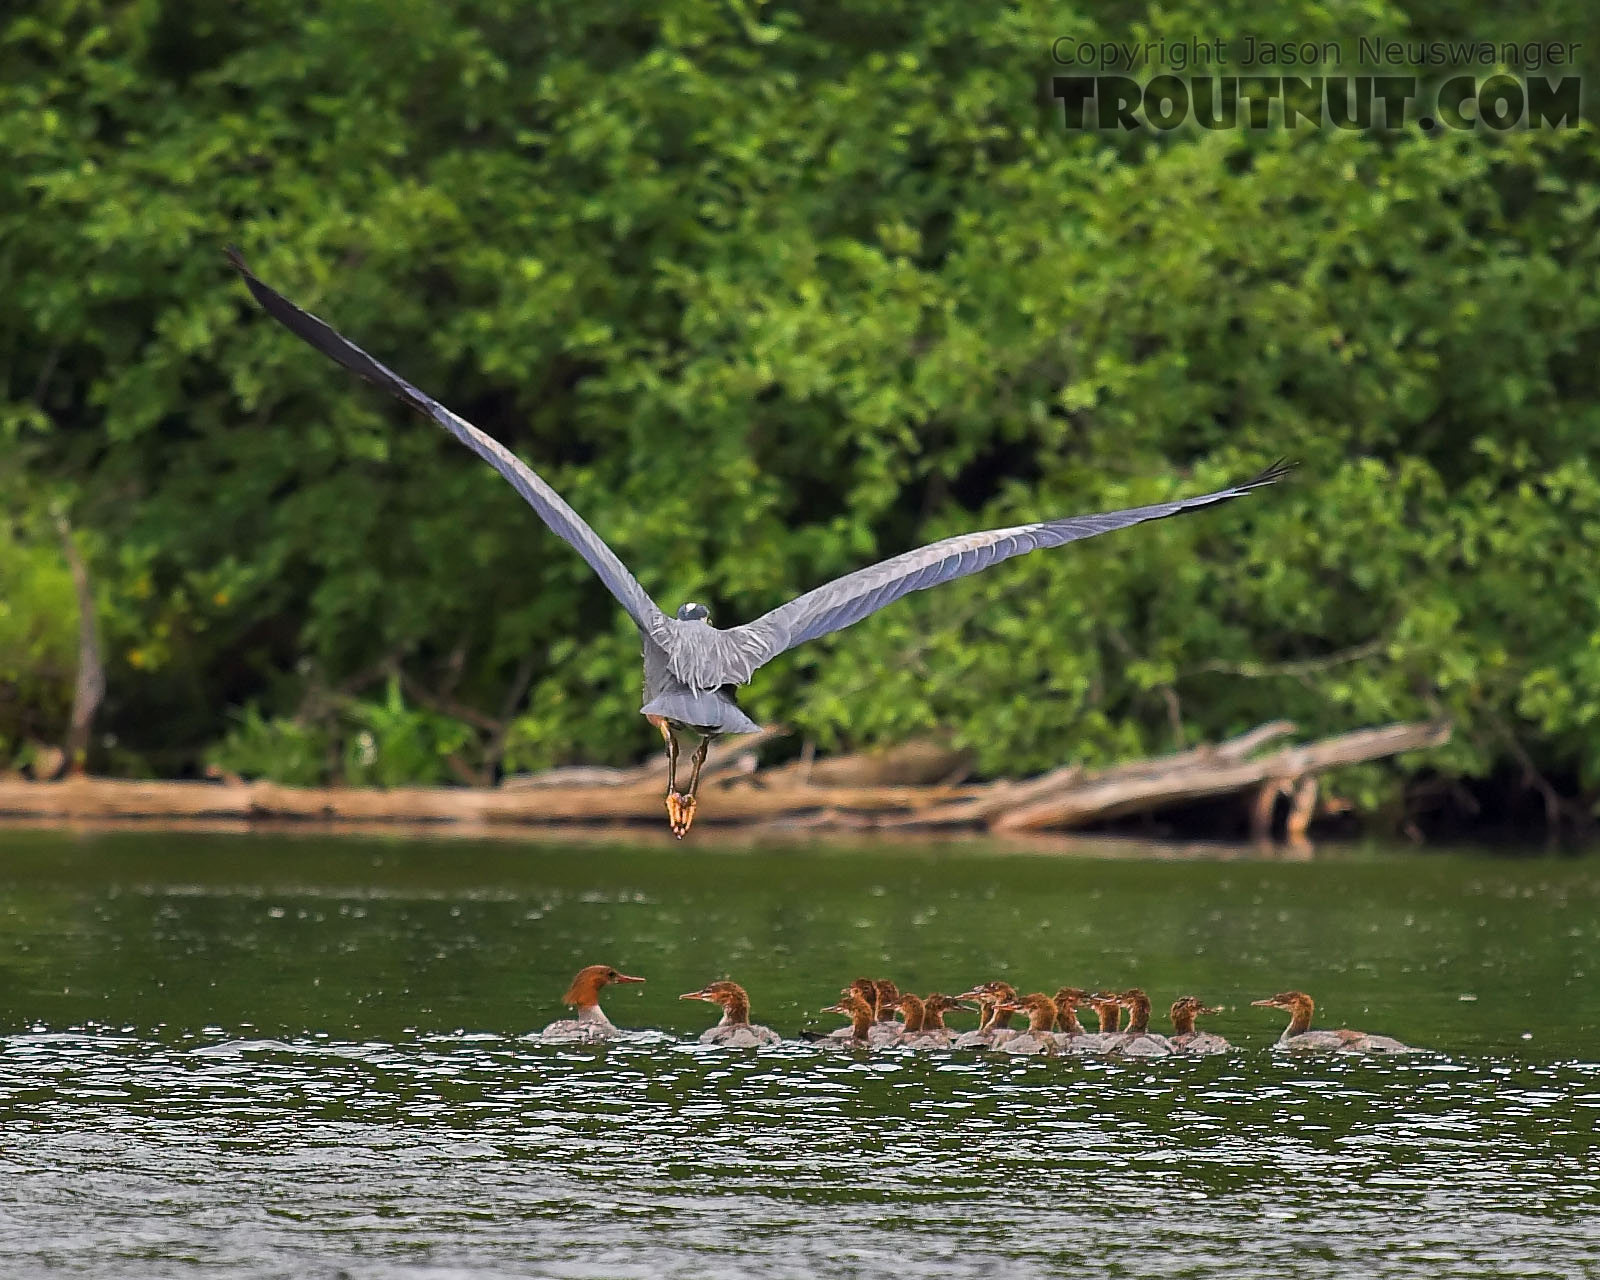 A great blue heron does a flyover on a flock of young common mergansers.  I wonder how many hundreds of young trout go into the creation of a great blue heron and fifteen mergansers... hmm, where's Dick Cheney when you need him?

Photo by Elena Vayndorf. From the Namekagon River in Wisconsin.